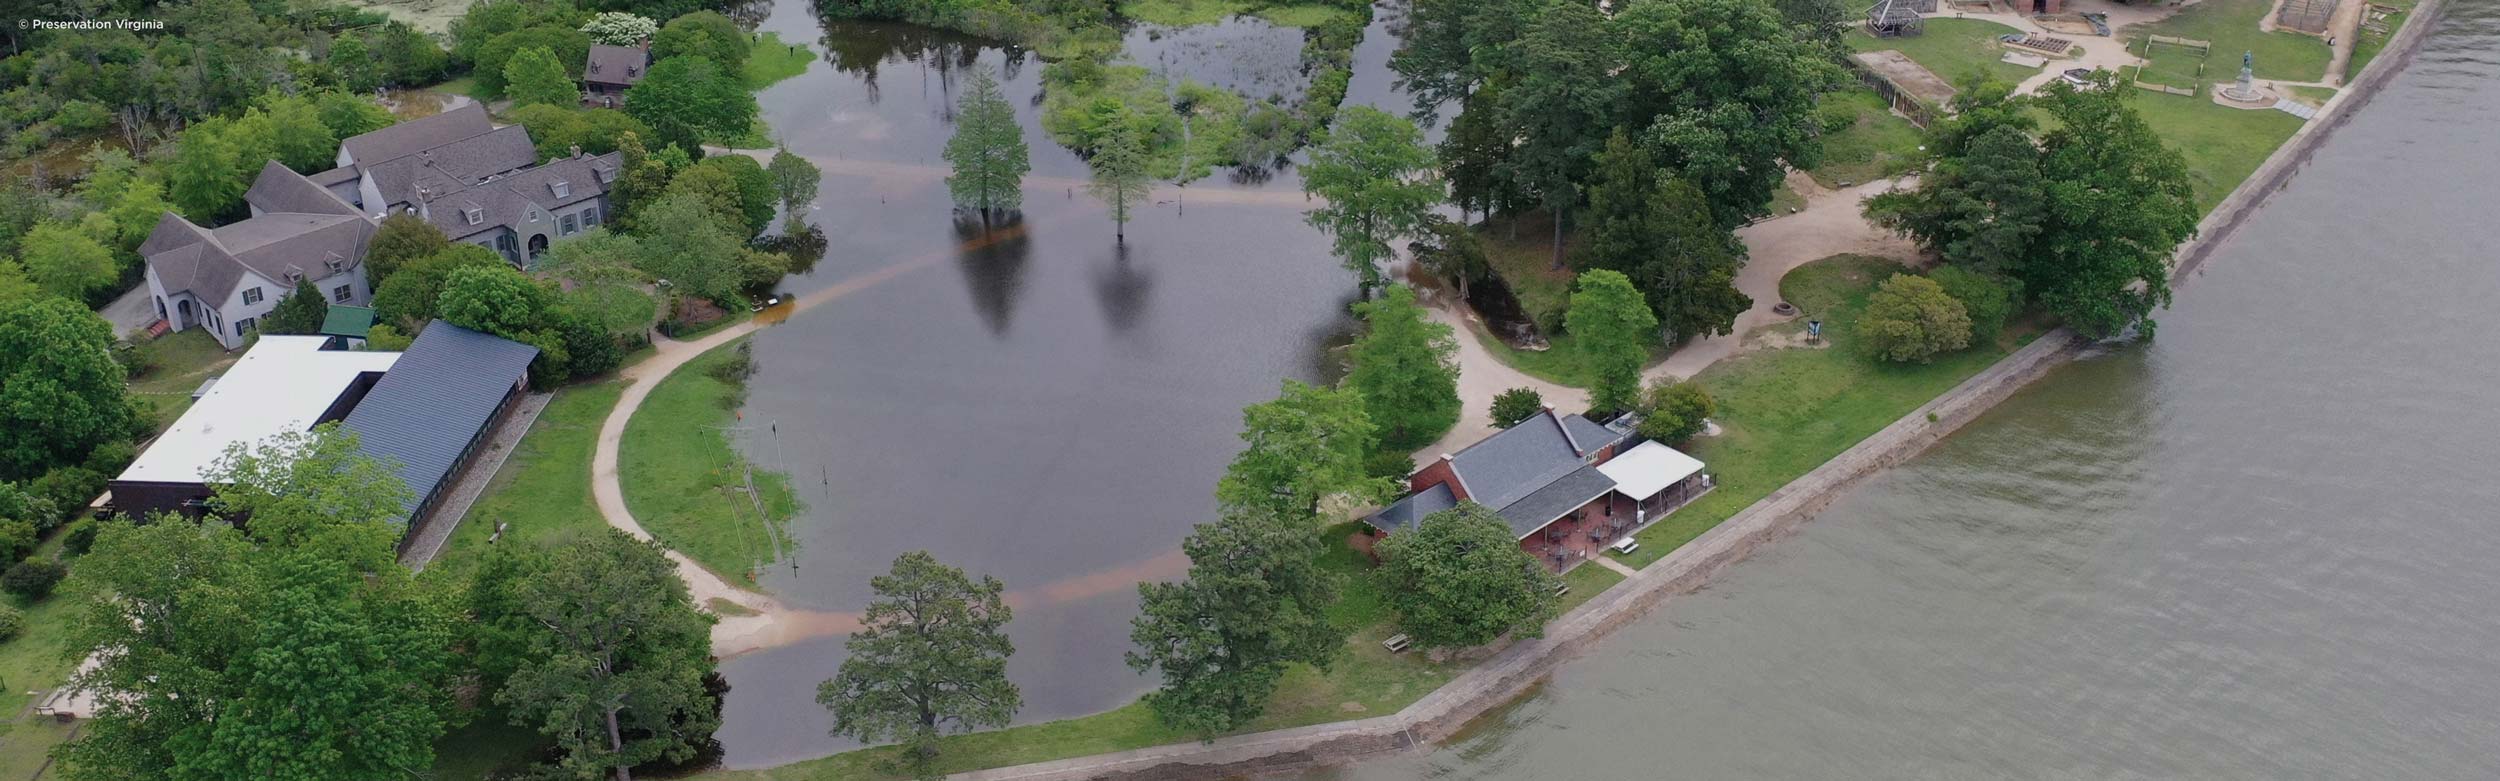 An aerial photo of flooding at Jamestown after a major rain event.